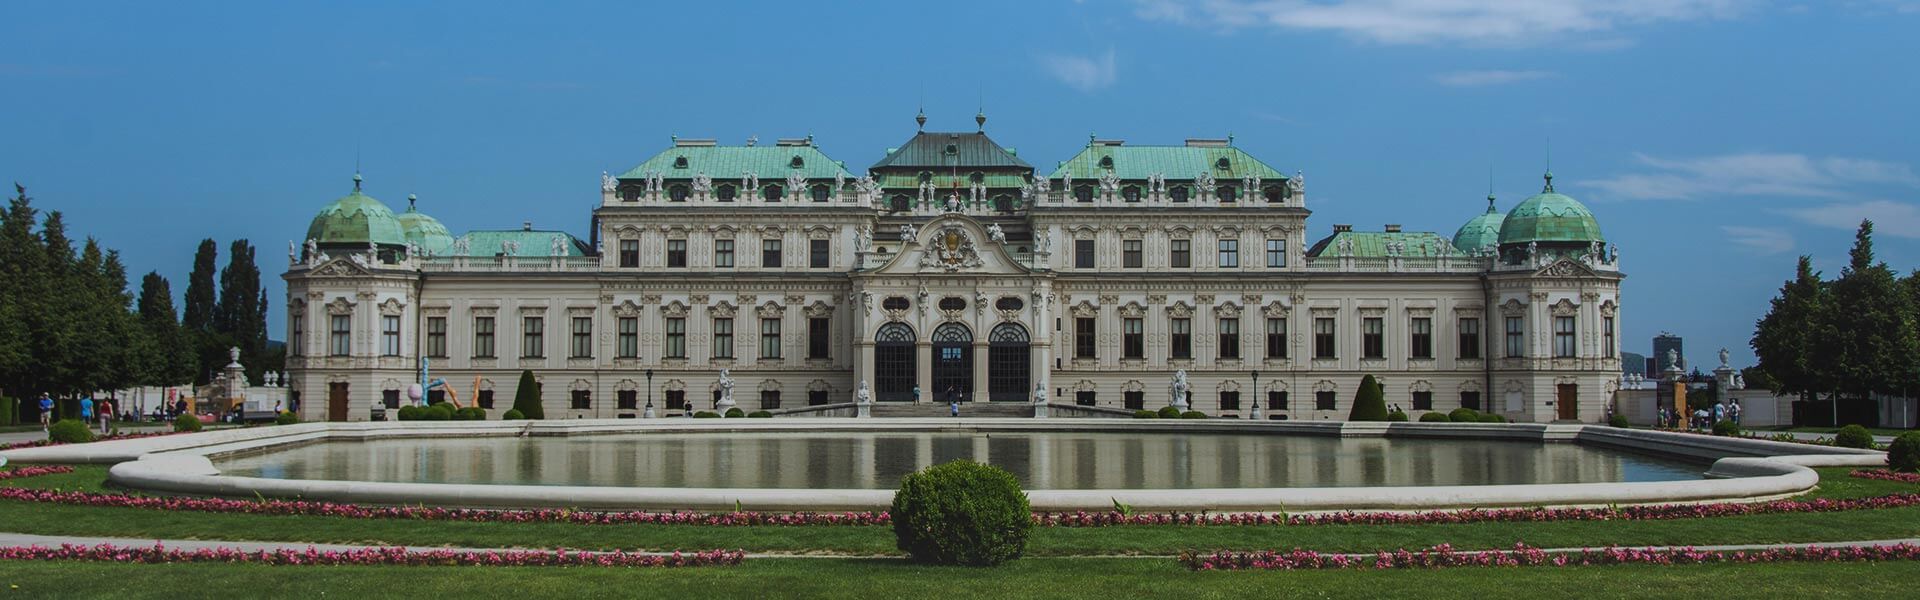 Schönbrunn Palace vs Belvedere Palace ! Which of these two palaces